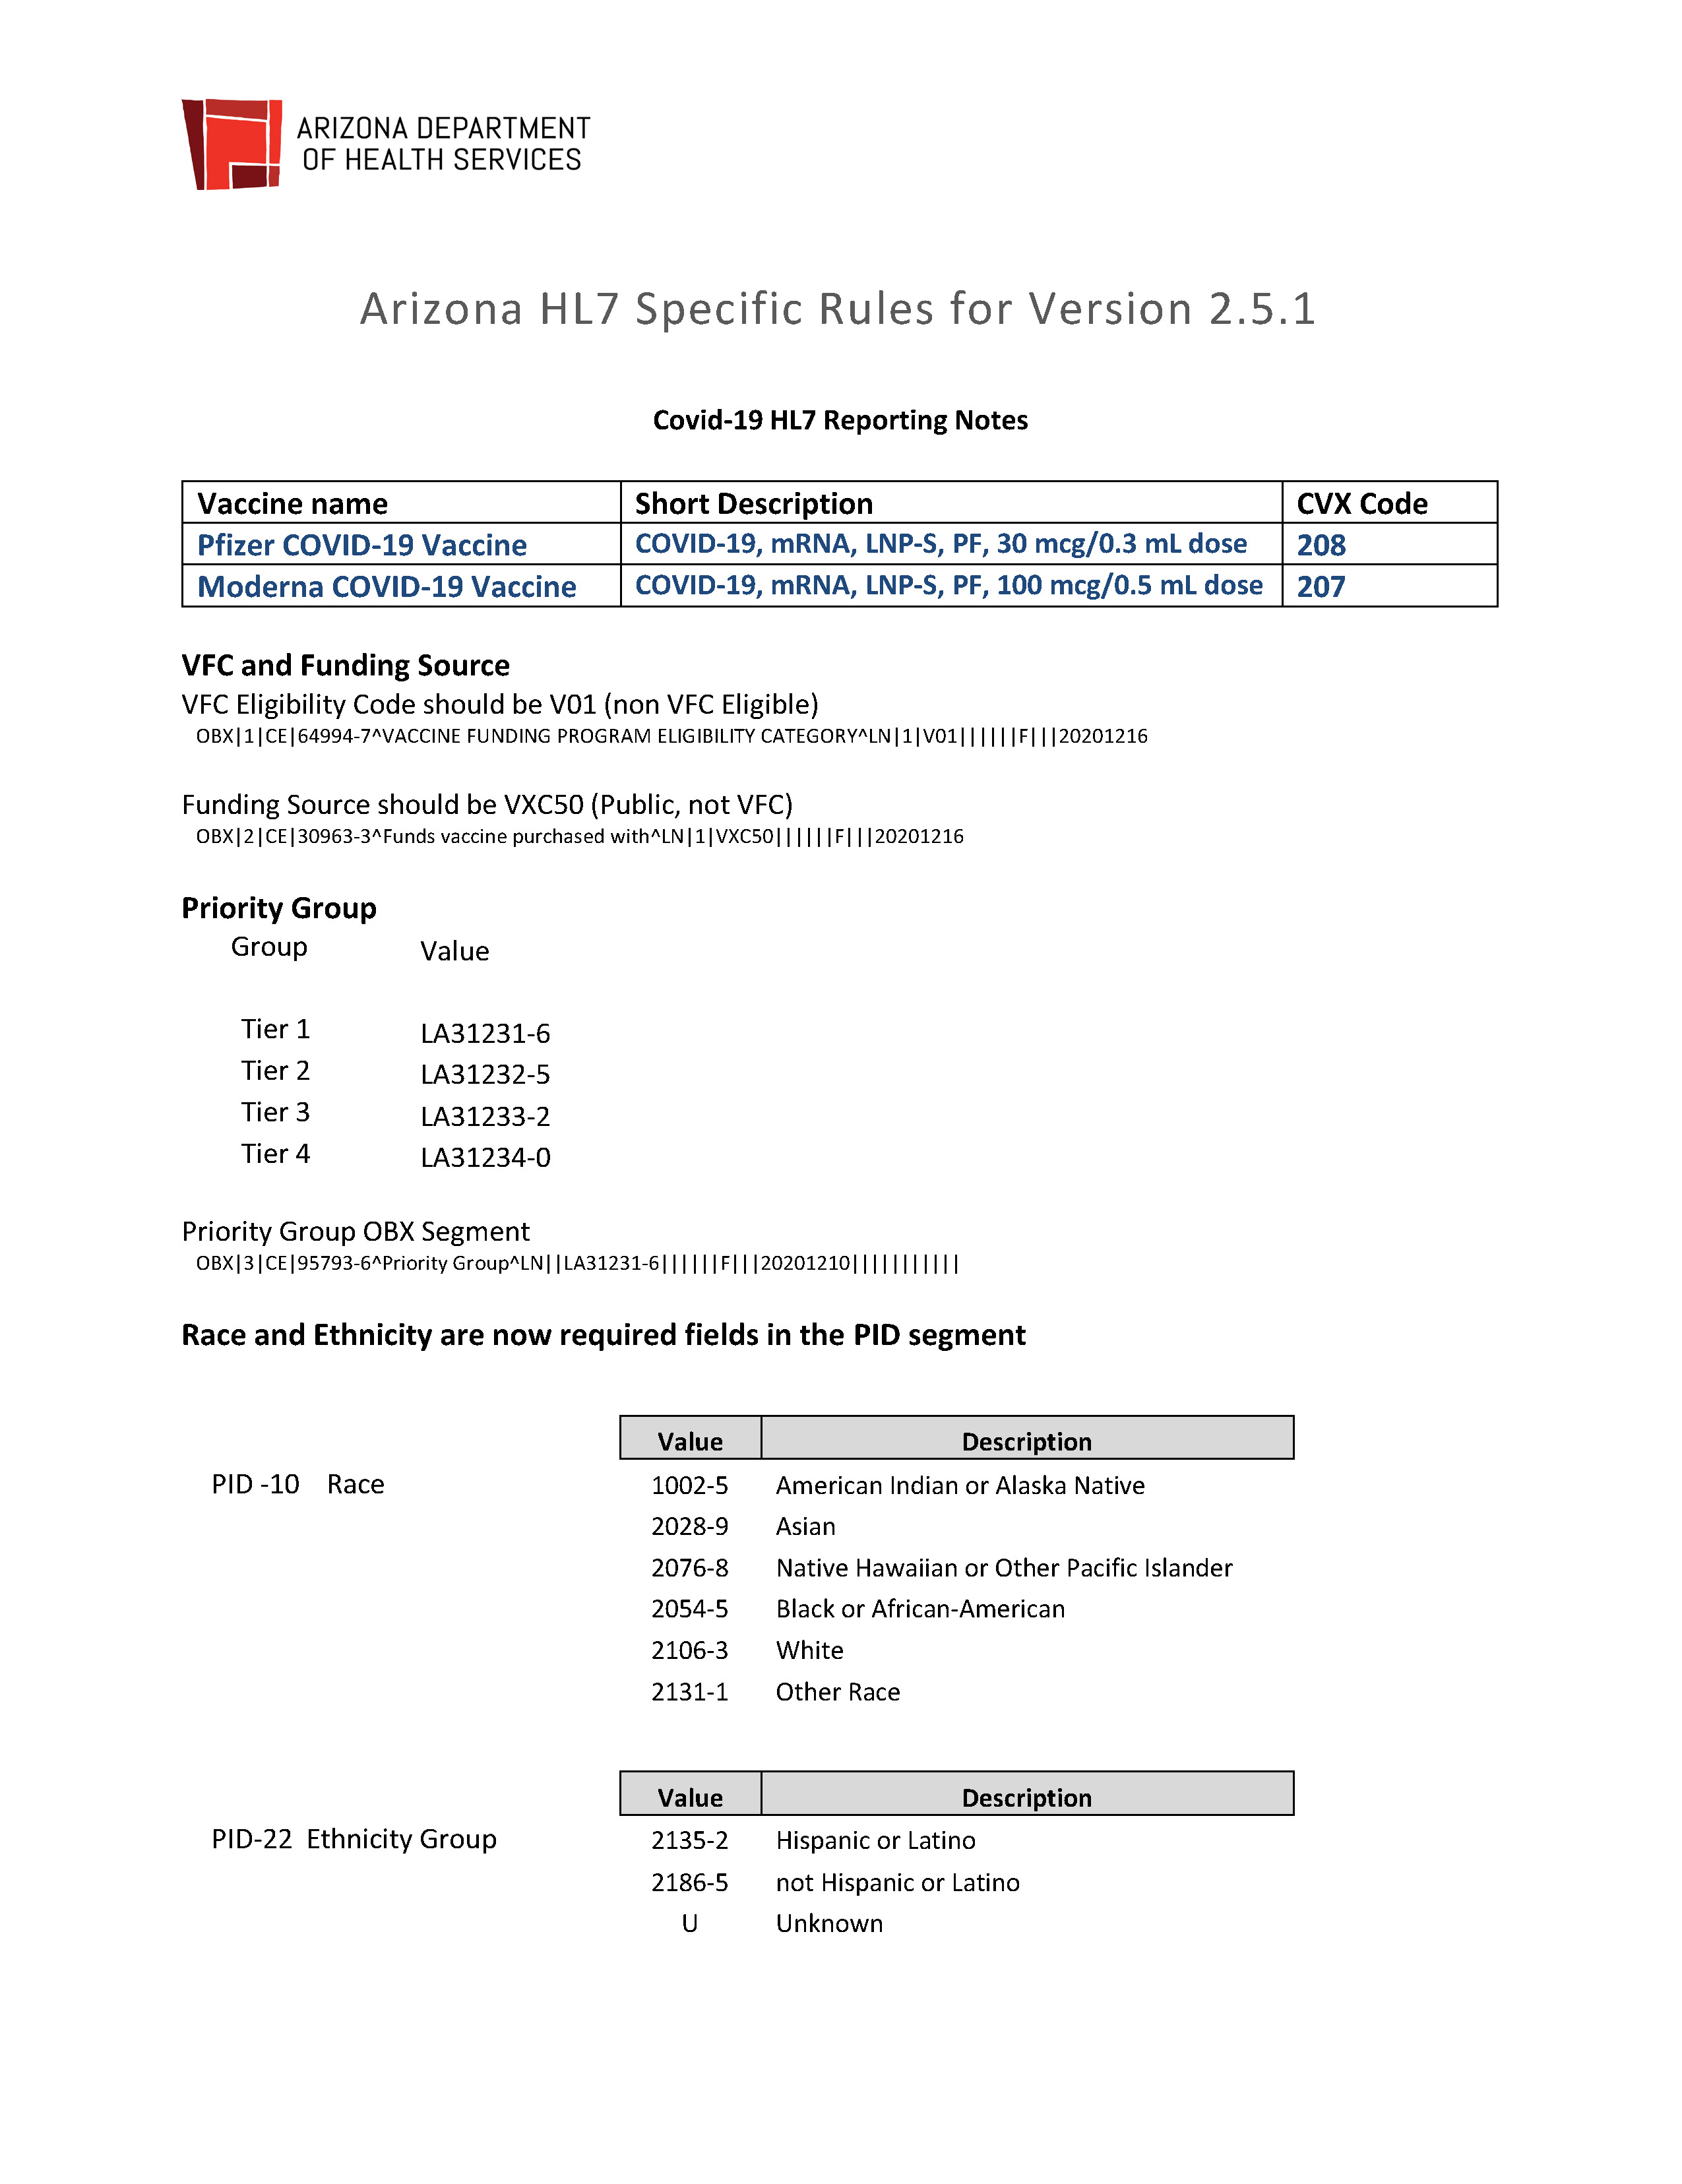 Arizona HL7 Specific Rules for Version 2.5.1